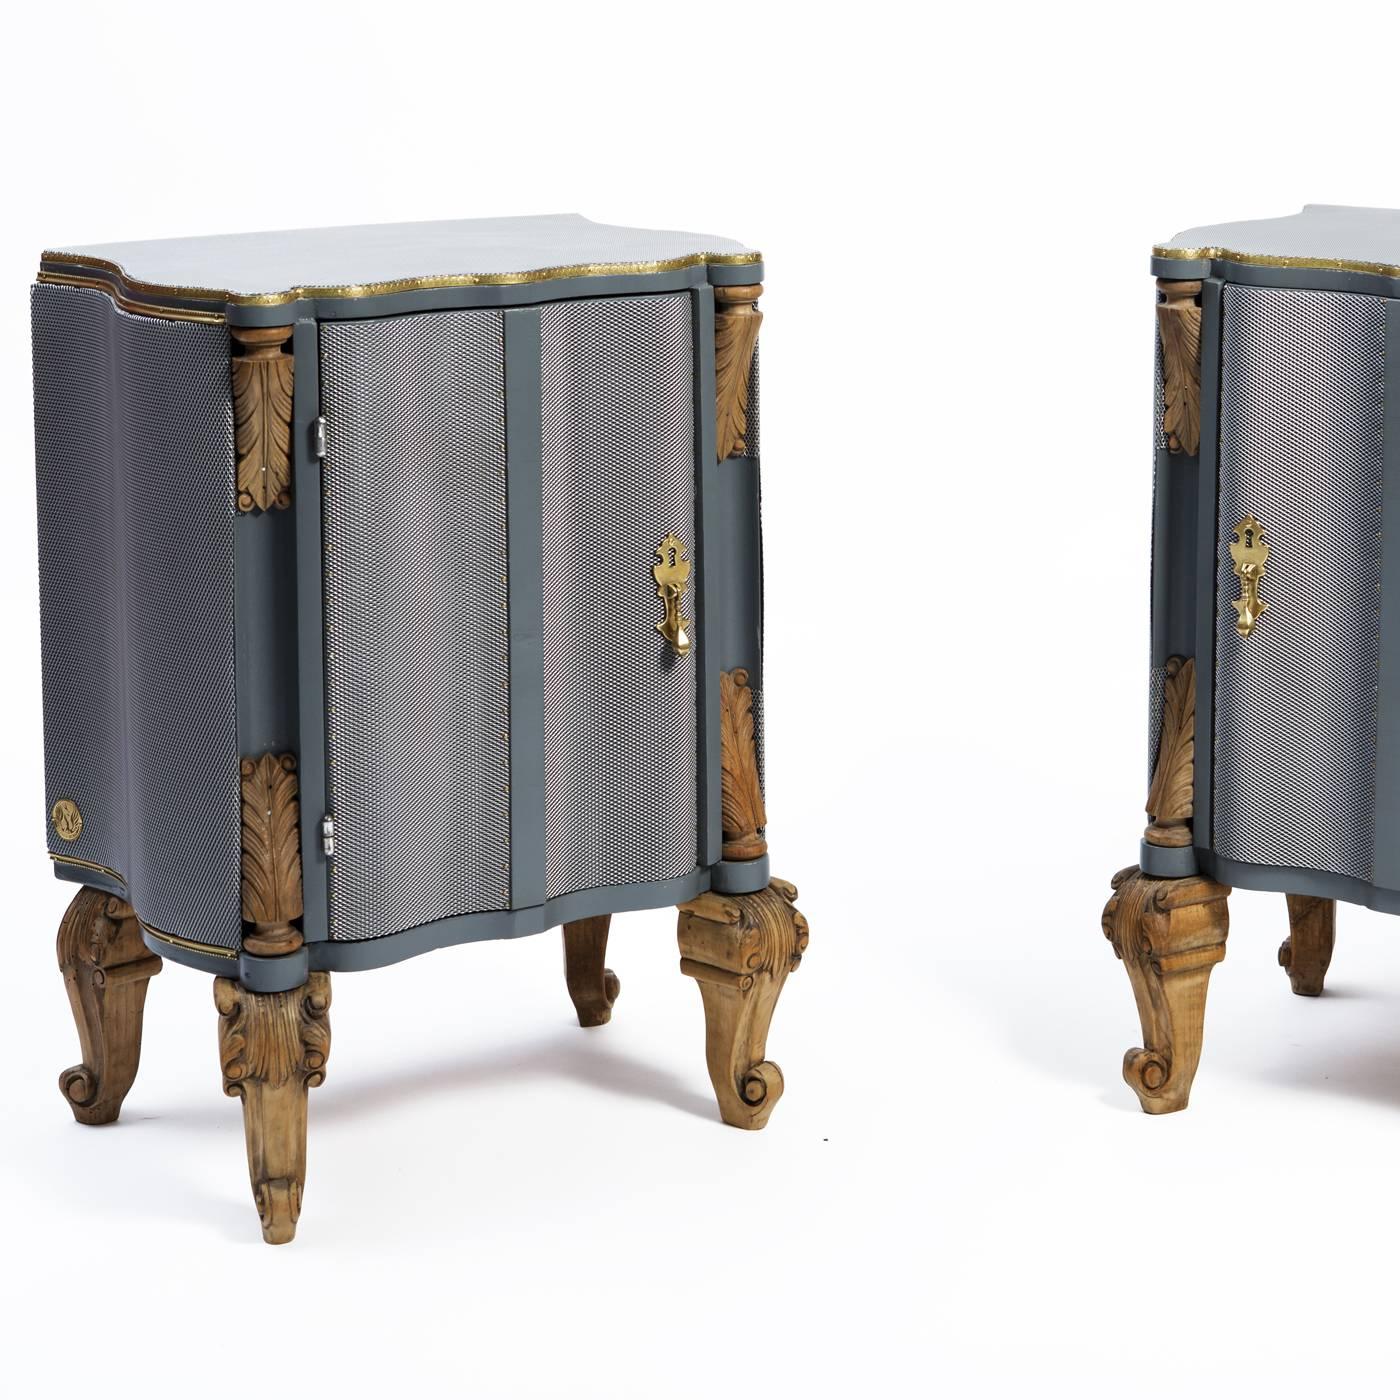 Inspired by ancient chainmail, these striking nightstands are partially covered in an iron mesh that envelops them while emphasizing their simple Silhouette and sinuous accents. The original gilt details around the top edges and antique carved